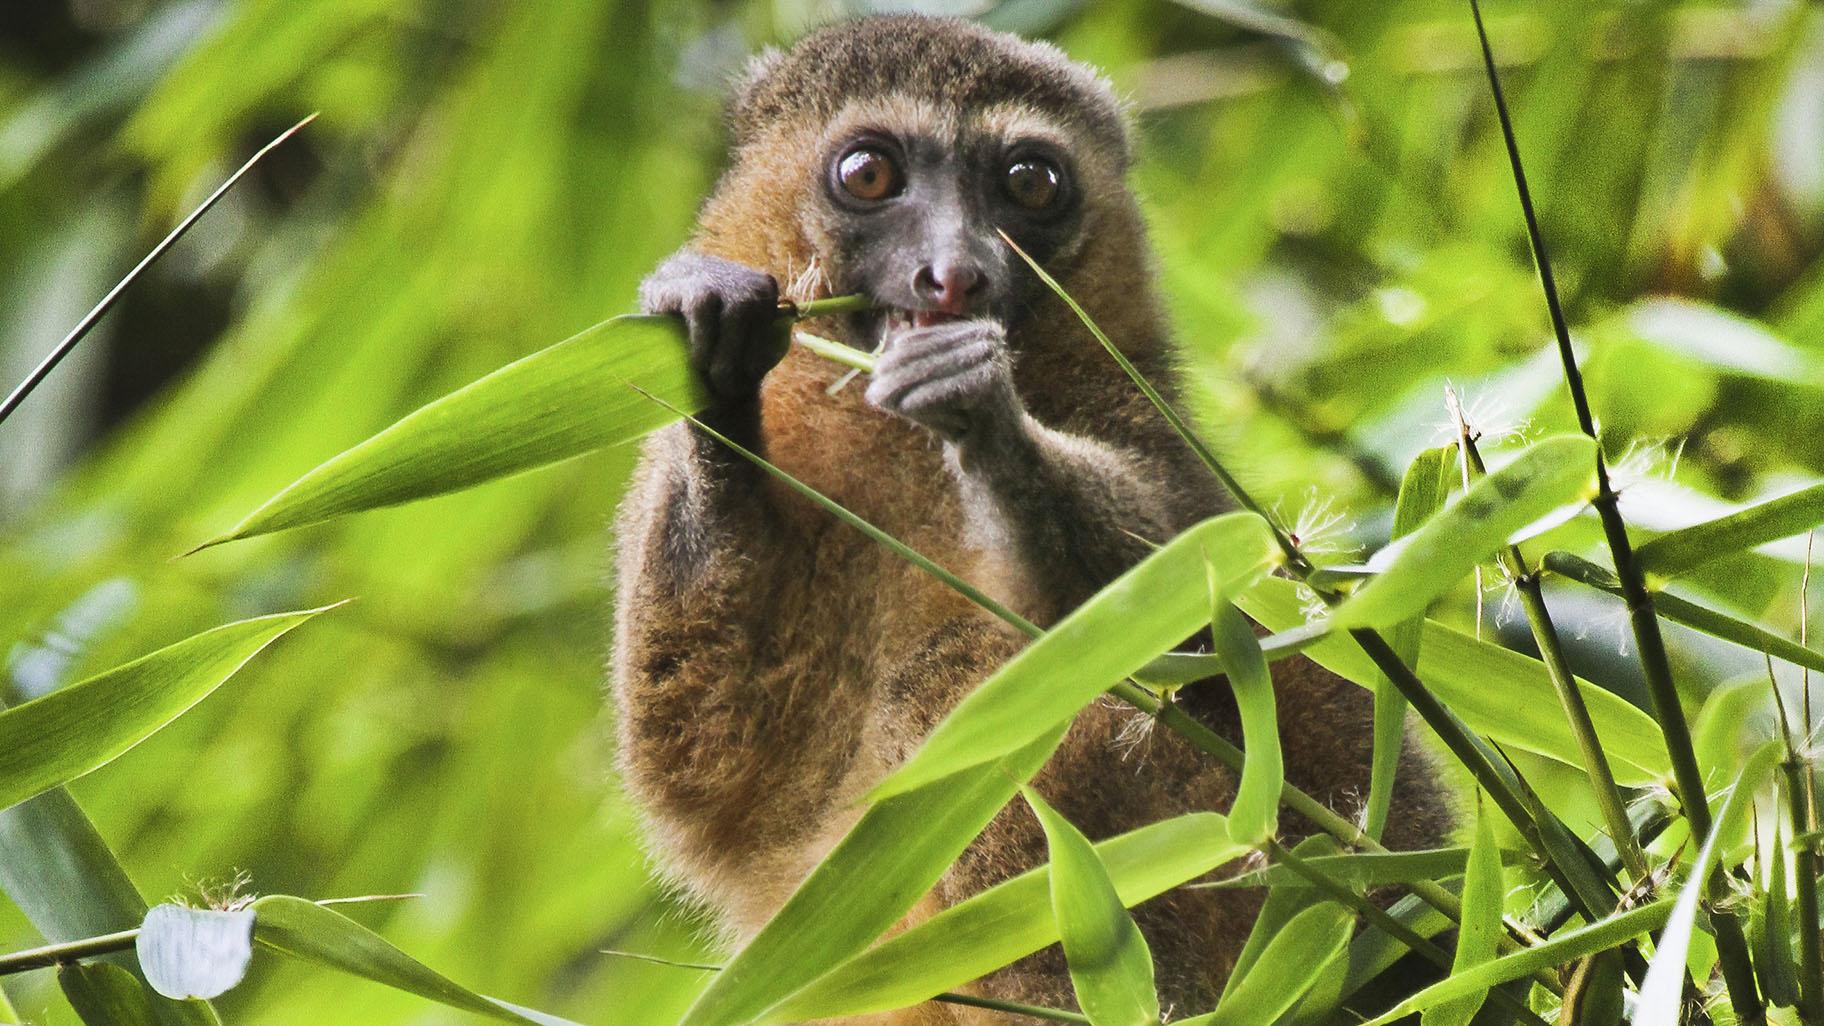 This 2019 photo provided by Noel Rowe and Centre ValBio shows a golden bamboo lemur in Madagascar. (Noel Rowe / Centre ValBio via AP)